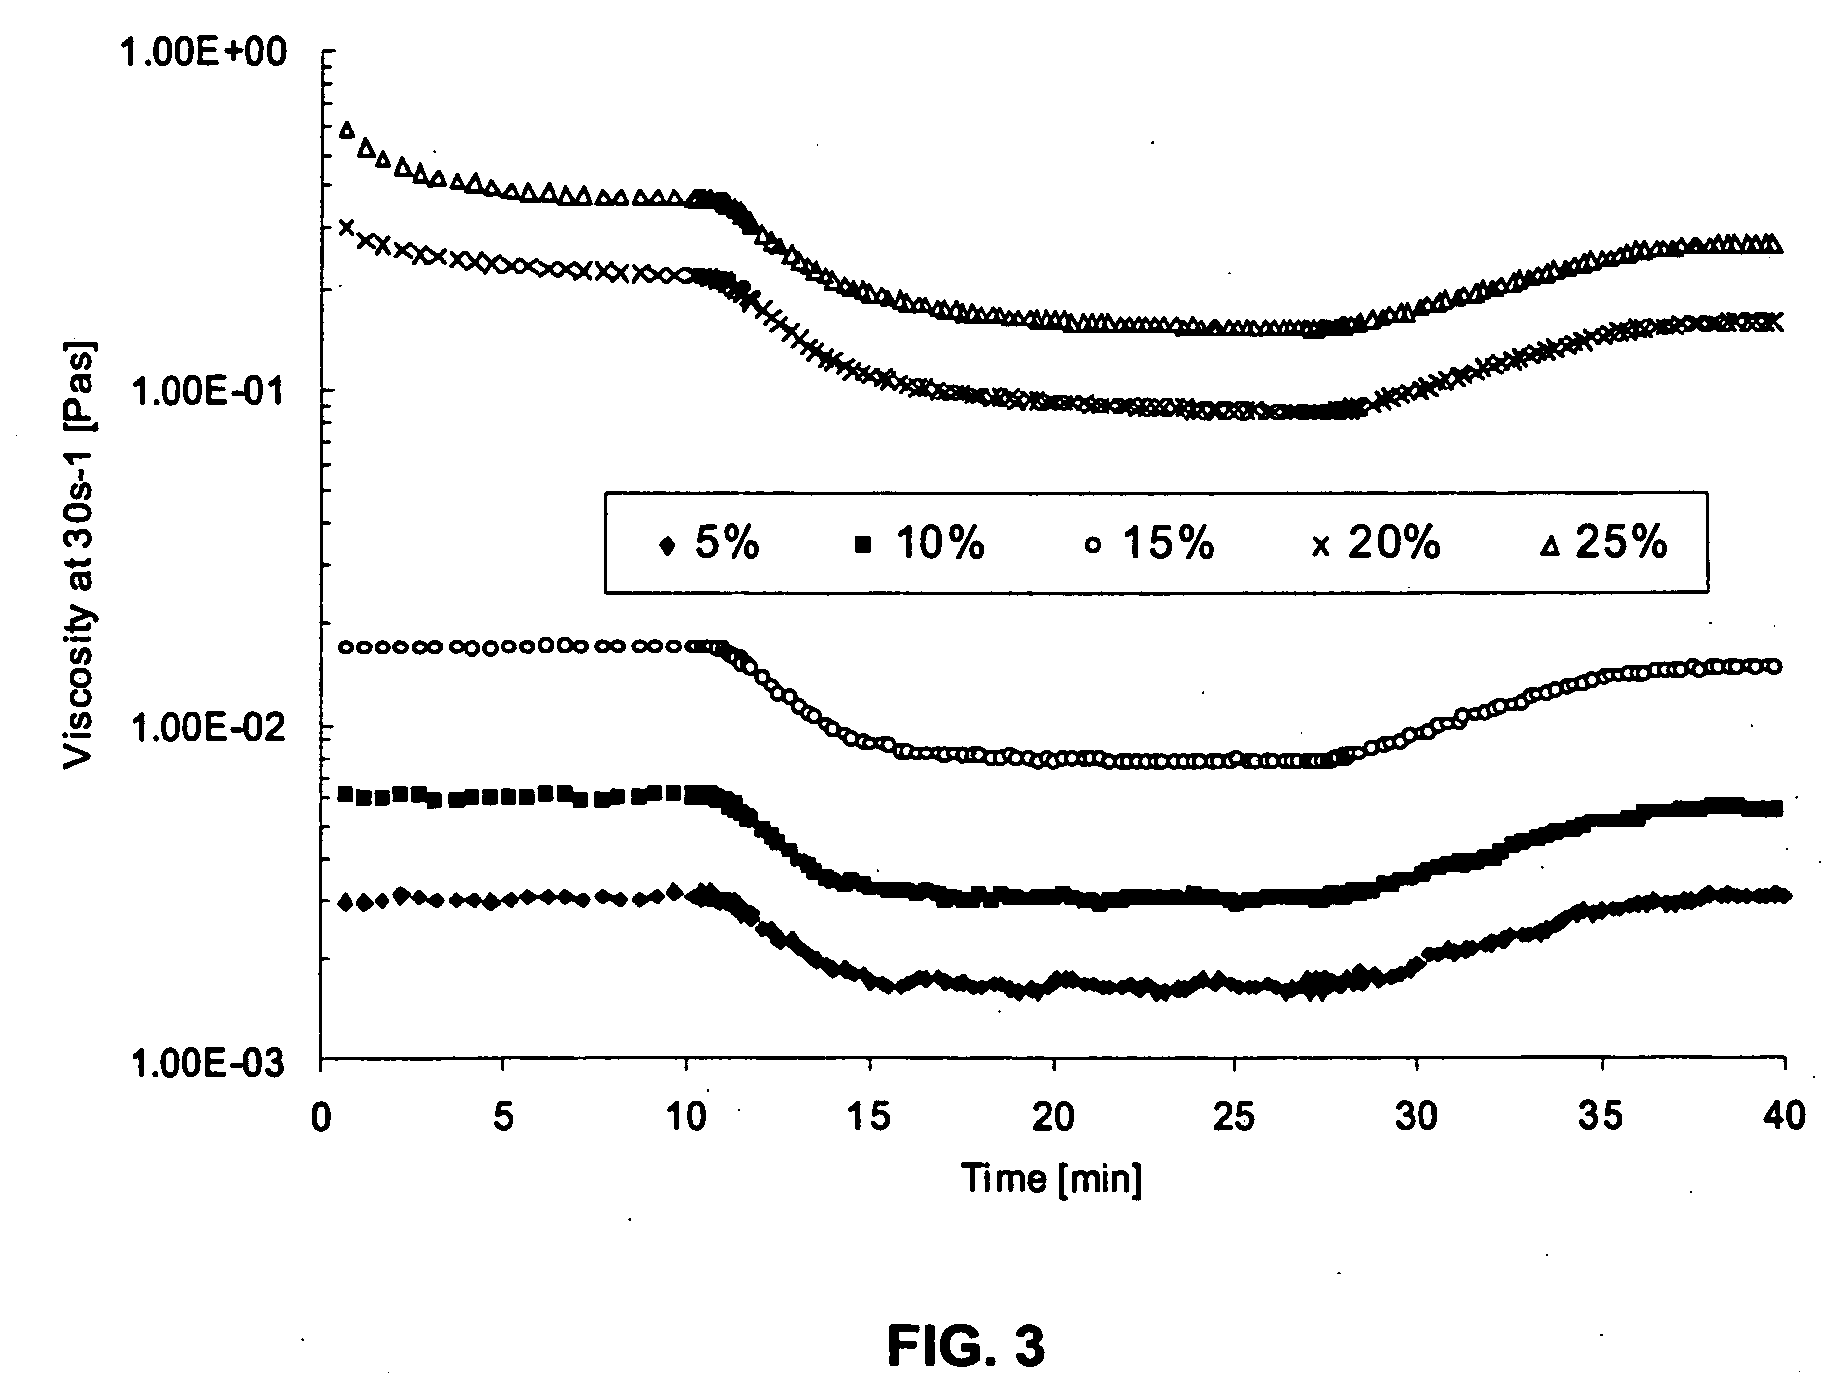 Chocolate products and ingredients and methods for producing novel oil-in-water suspensions having reduced water activity levels